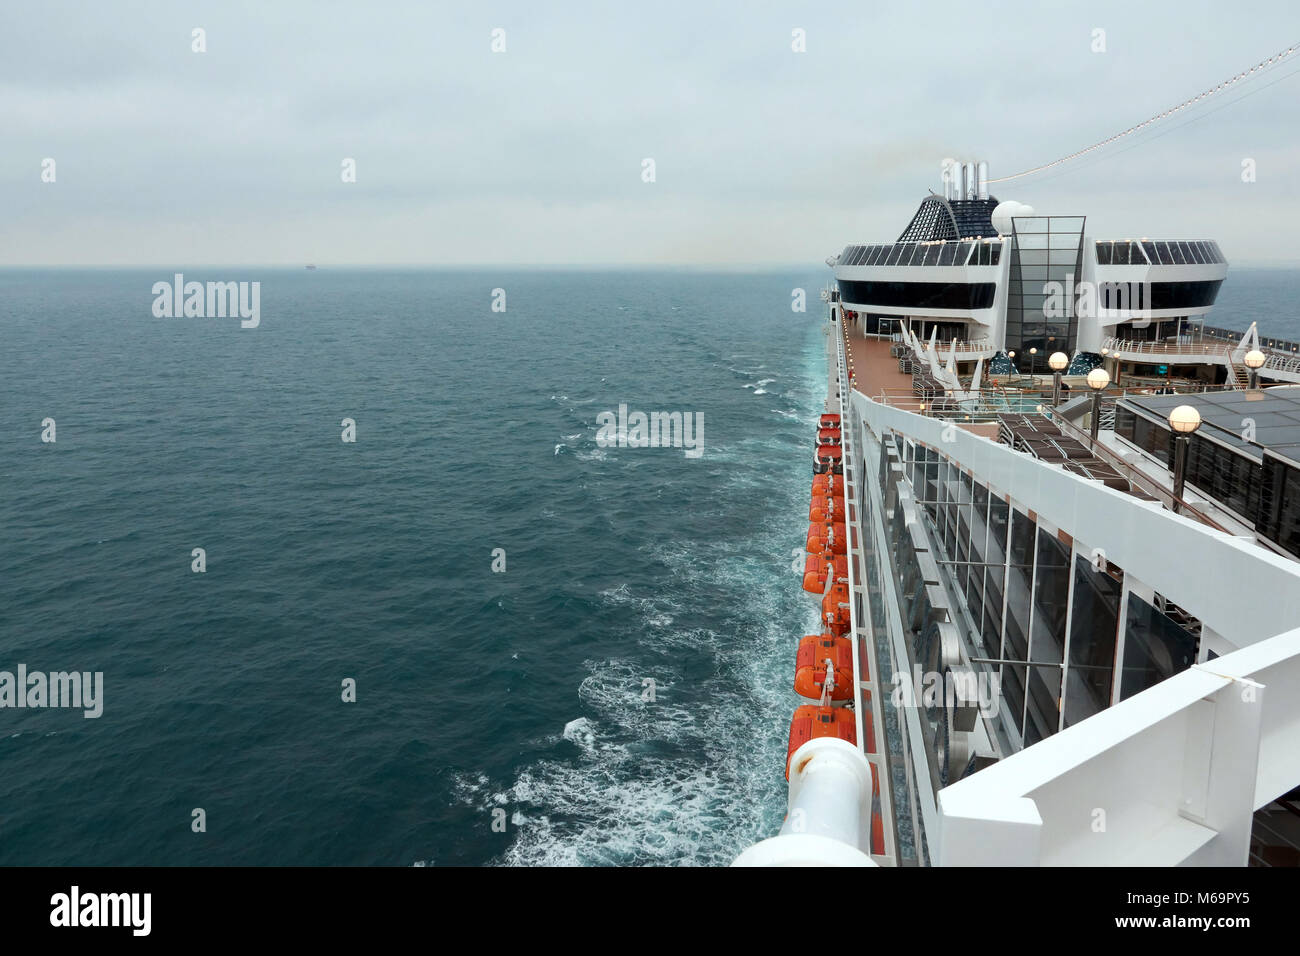 Great cruise liner in the open sea in cloudy weather. Stock Photo